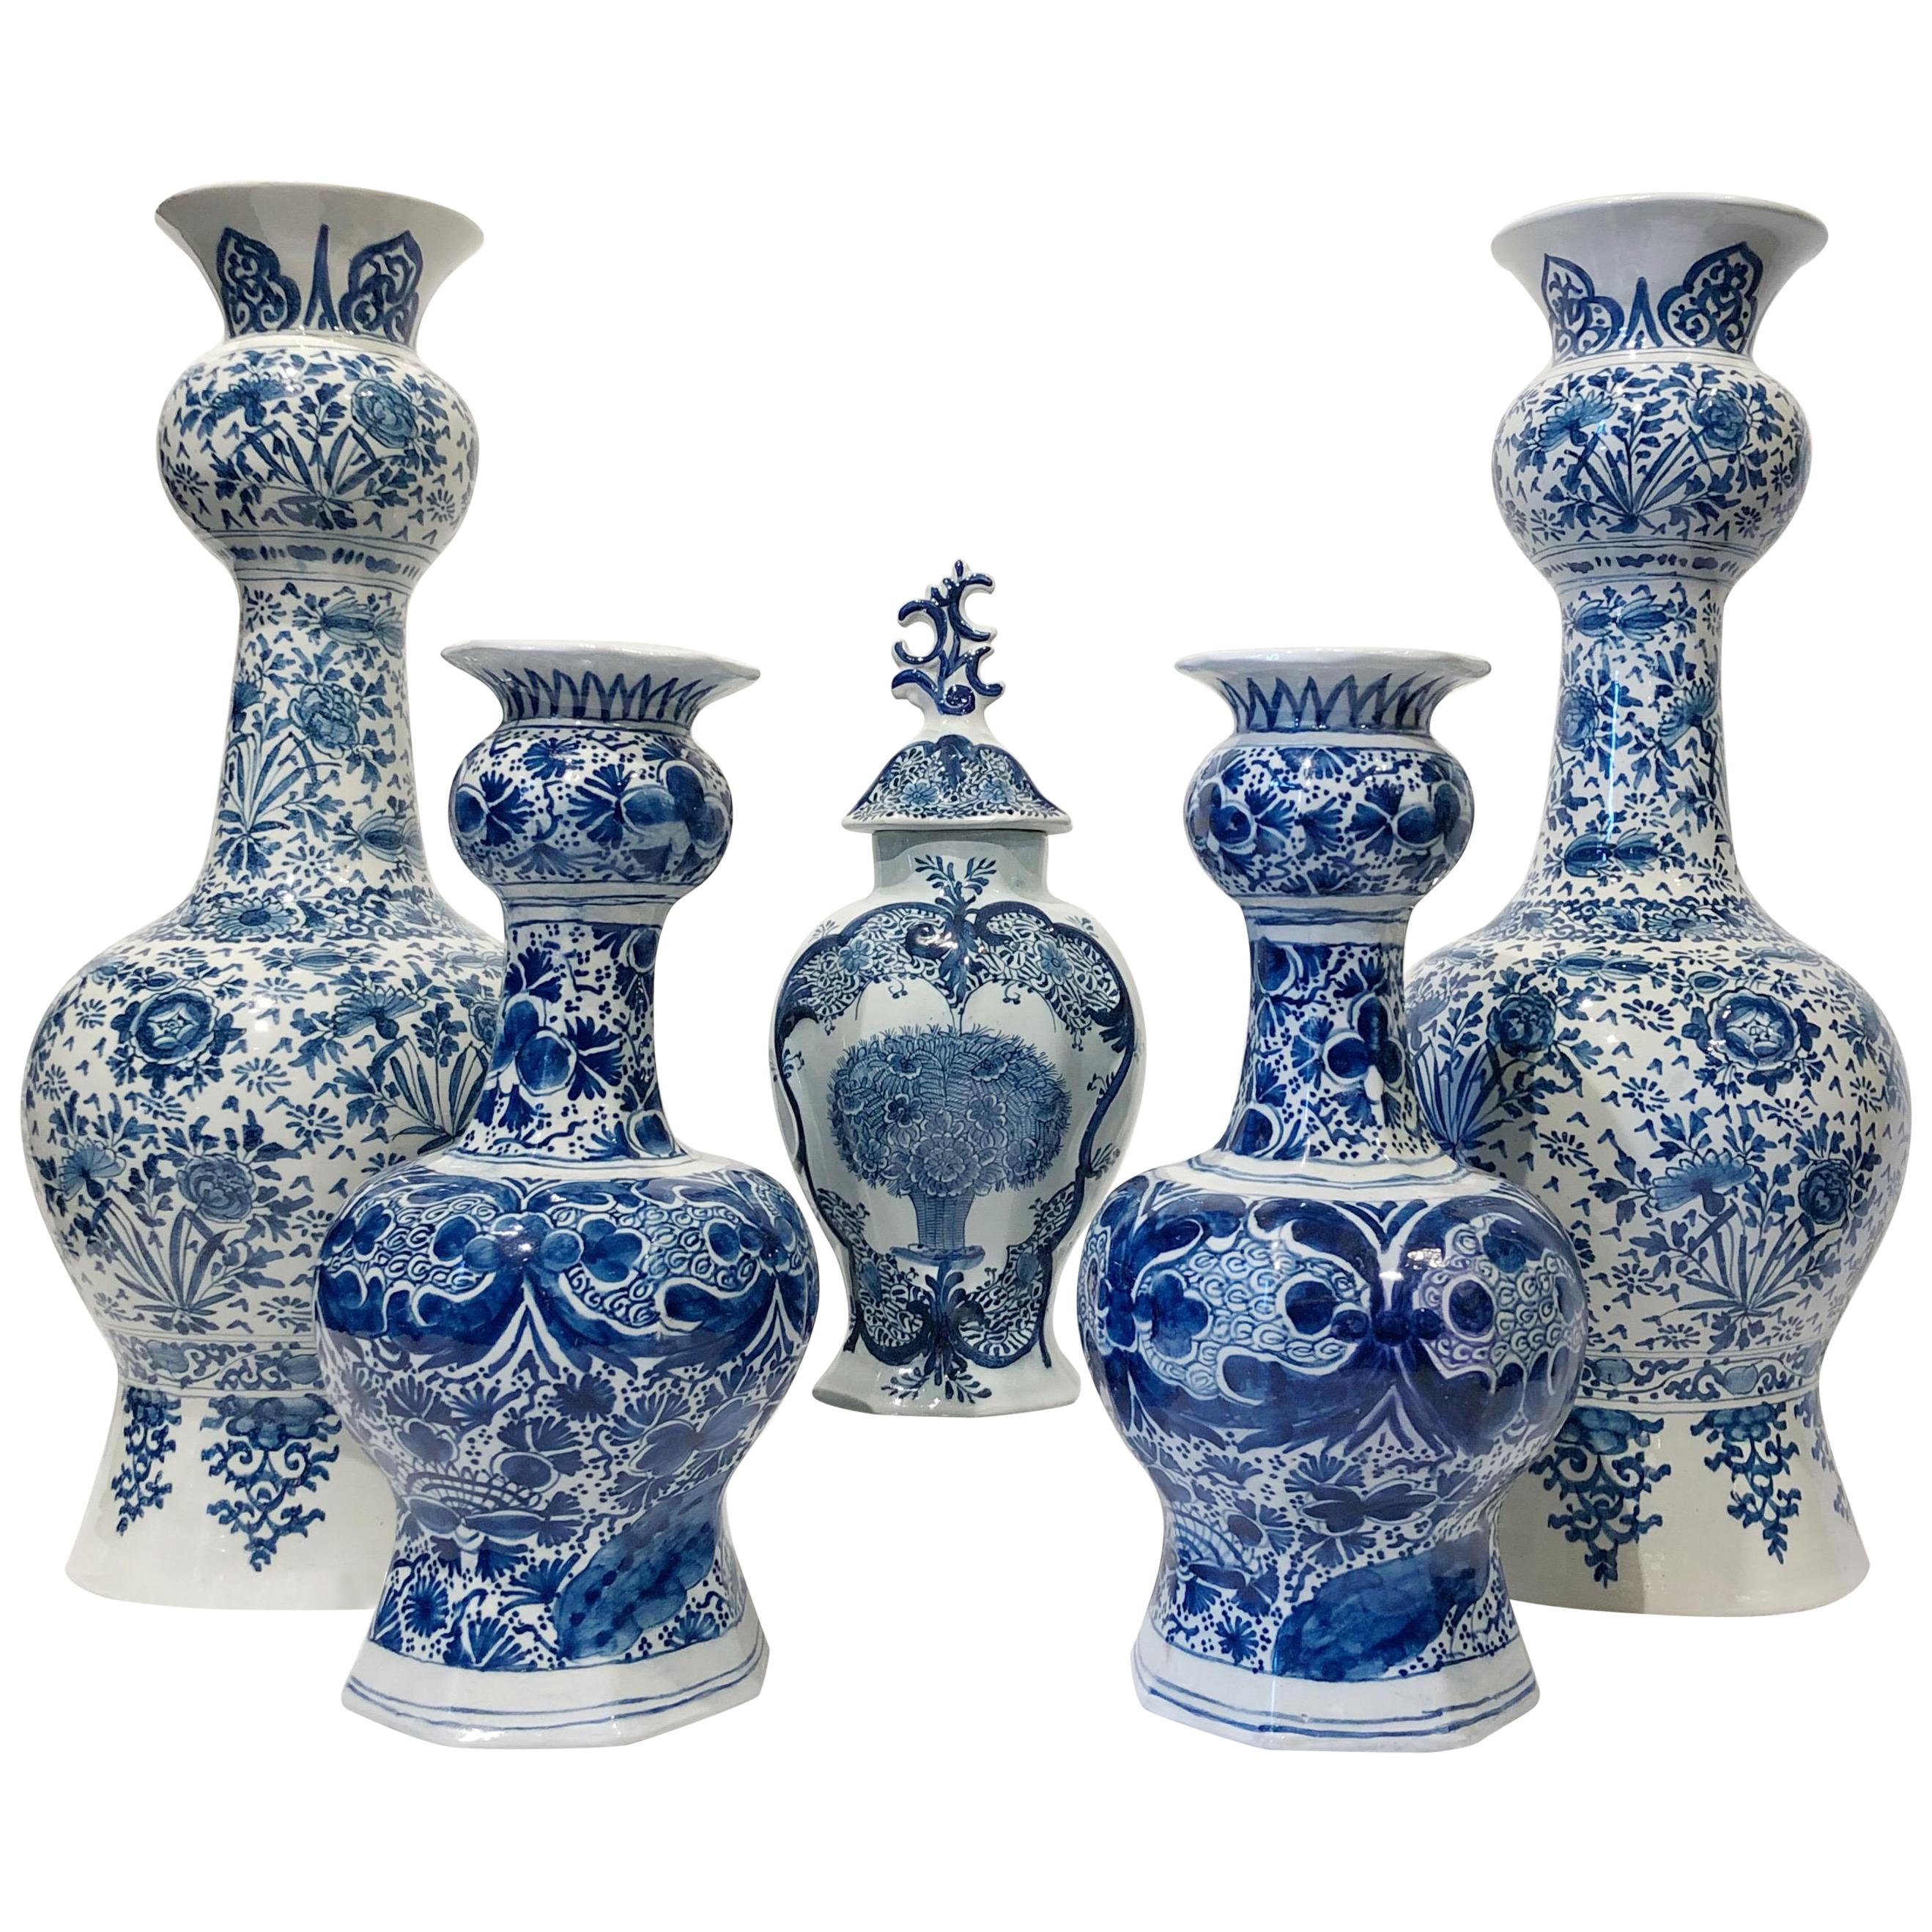 Collection of Dutch Delft Blue and White Vases Mid 18th Century